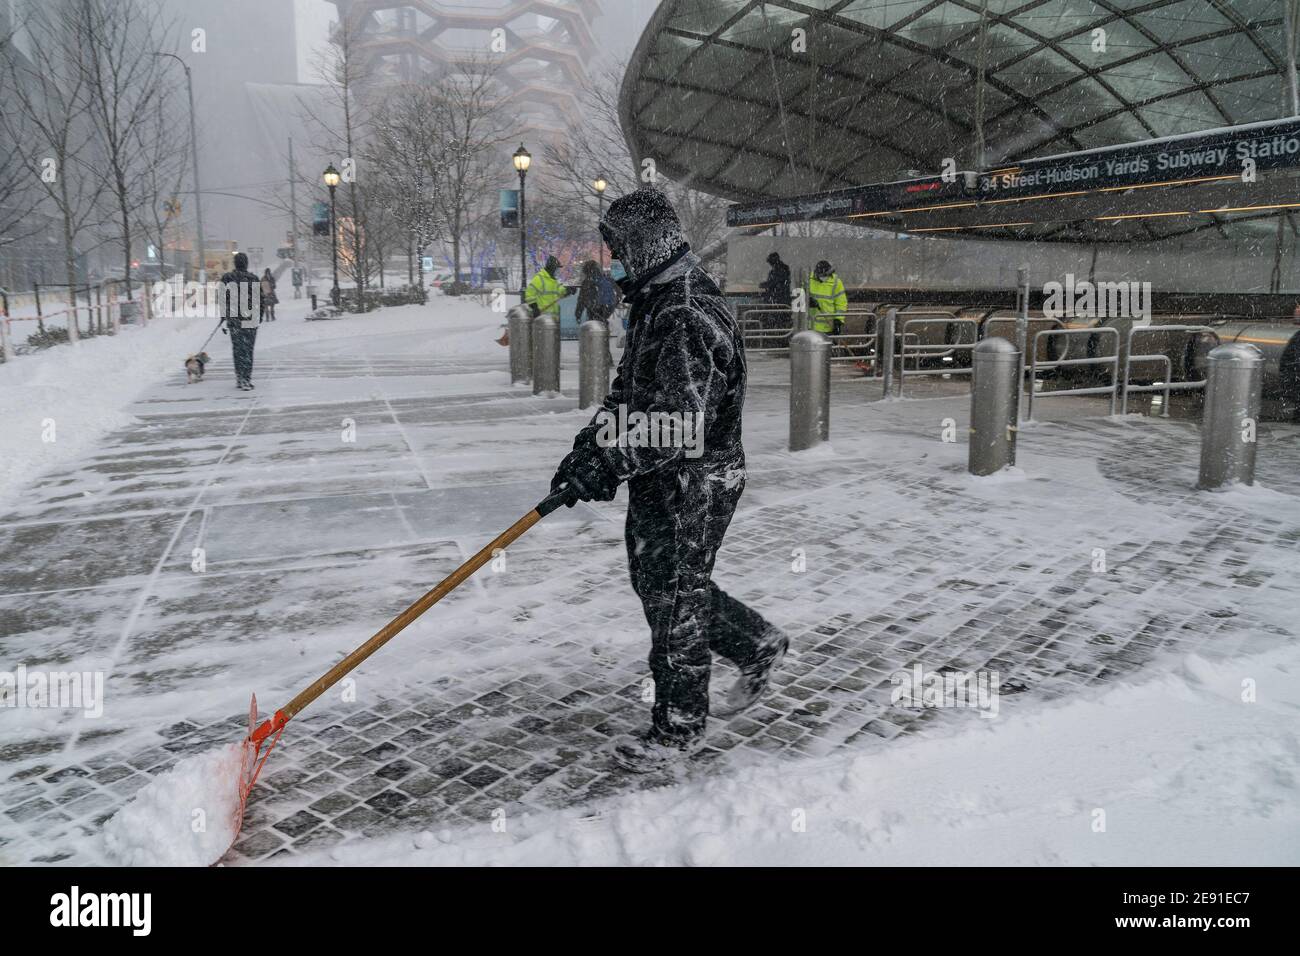 New York, United States. 01st Feb, 2021. Maintenance workers clear snow at Hudson Yards subway station entrance as major storm cover New York City with more than a foot expected on the ground on February 1, 2021. (Photo by Lev Radin/Sipa USA) Credit: Sipa USA/Alamy Live News Stock Photo